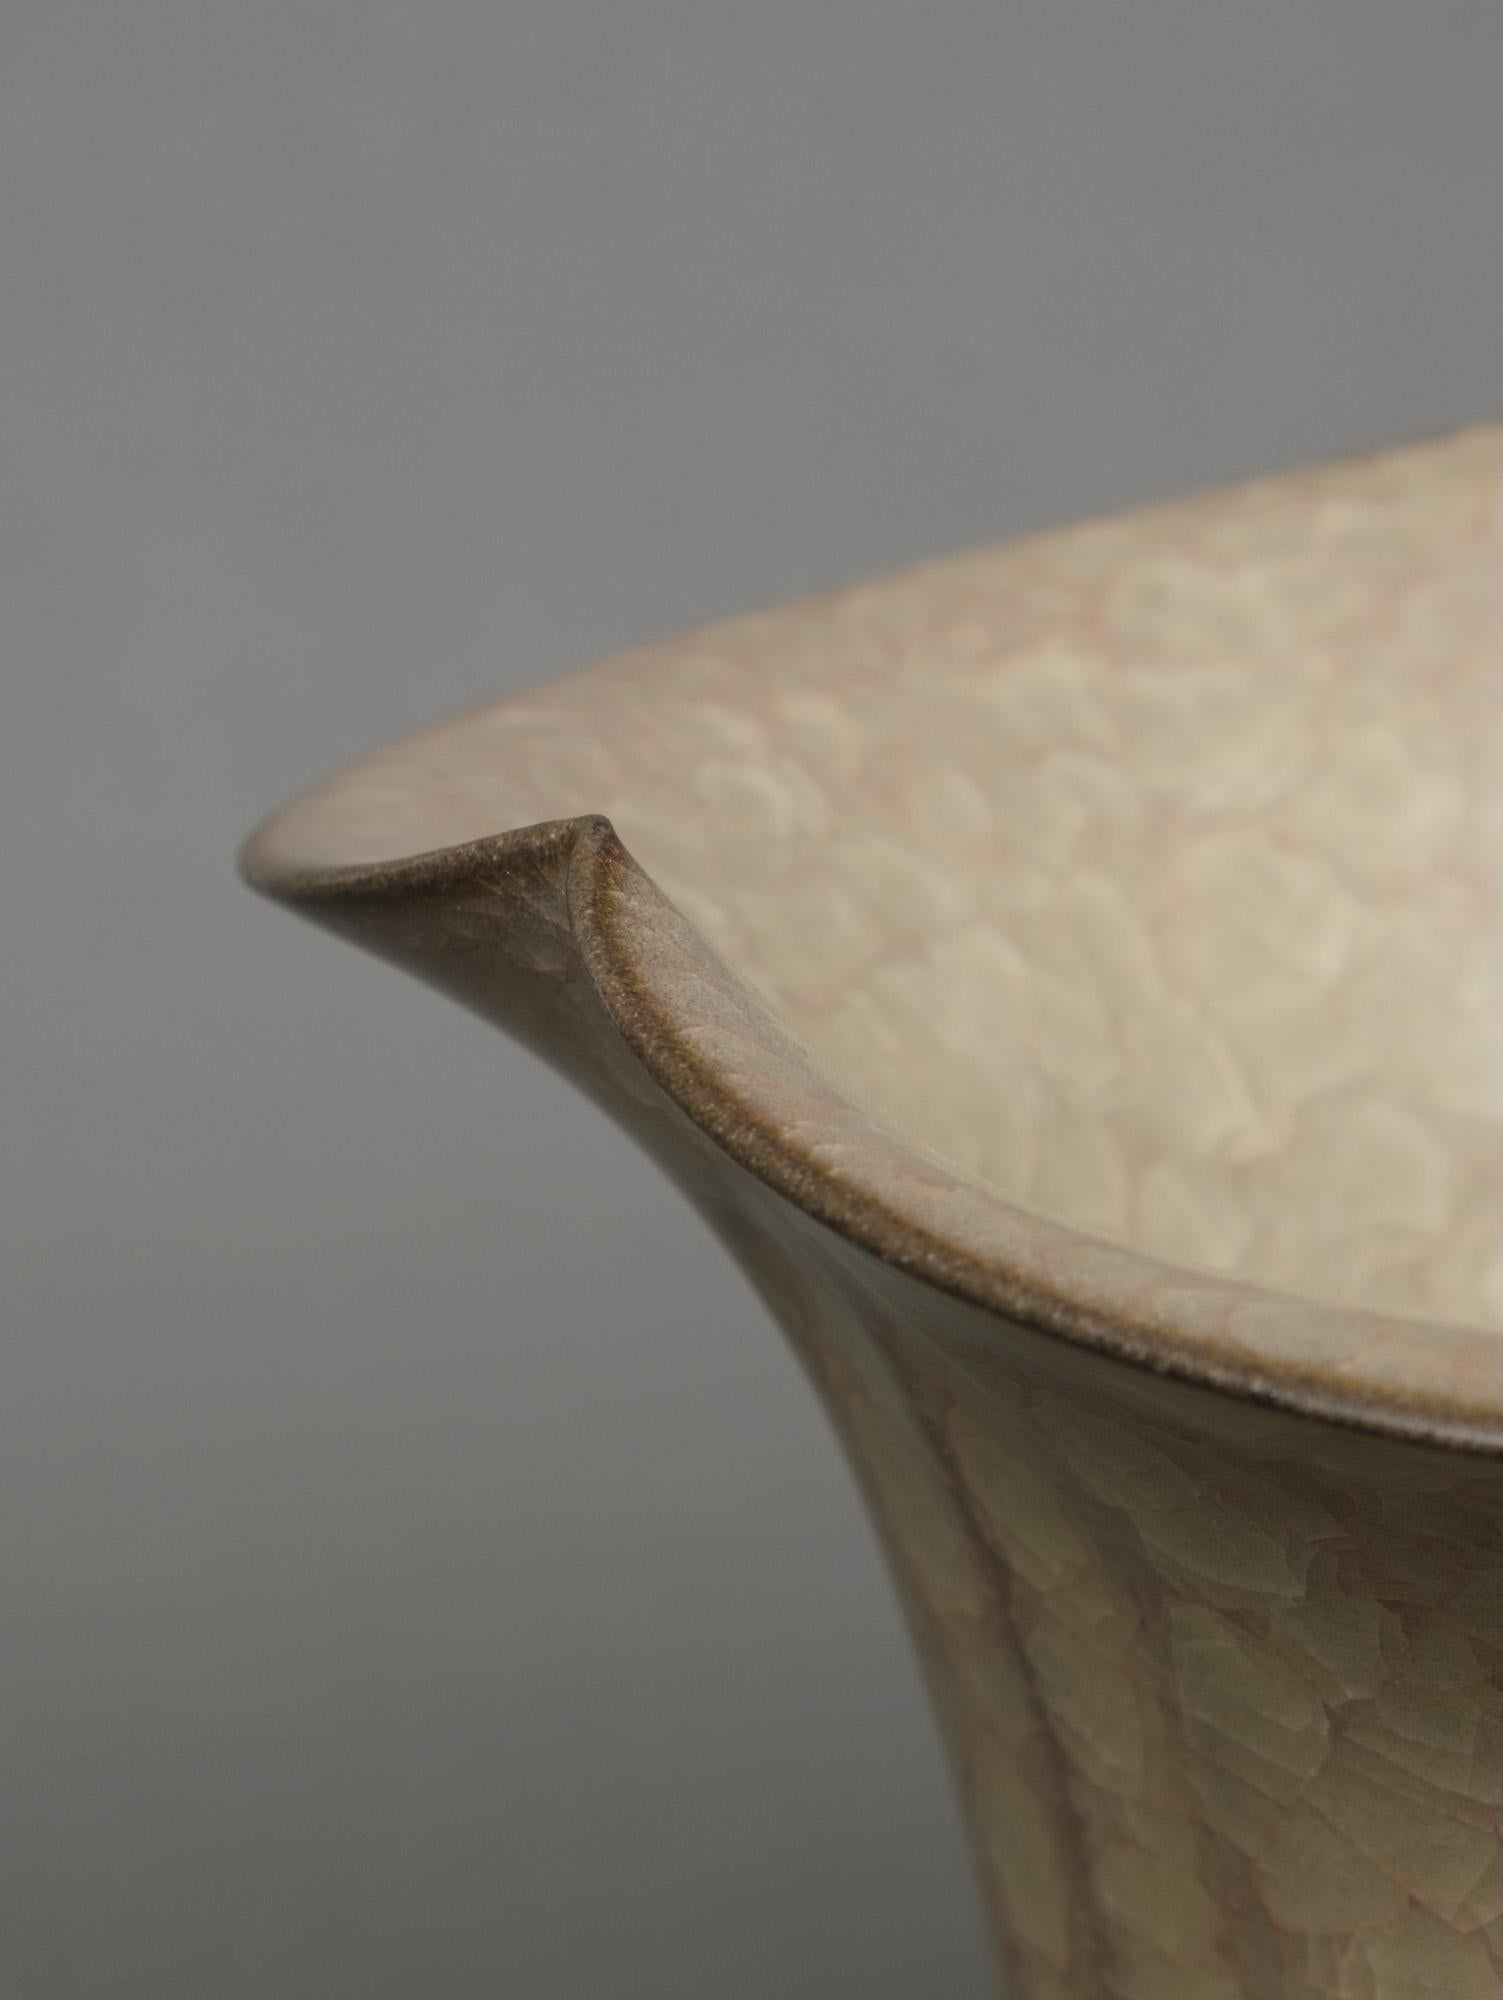 Exquisite stoneware vase of ‘gu’-like shape by the honoured artist Minegishi Seikô (1952-2023) with an undulating calyx-shaped mouth and covered by his trademark celadon glaze of grey-greenish colour. This high quality ‘kan’nyû’-type craquelé glaze